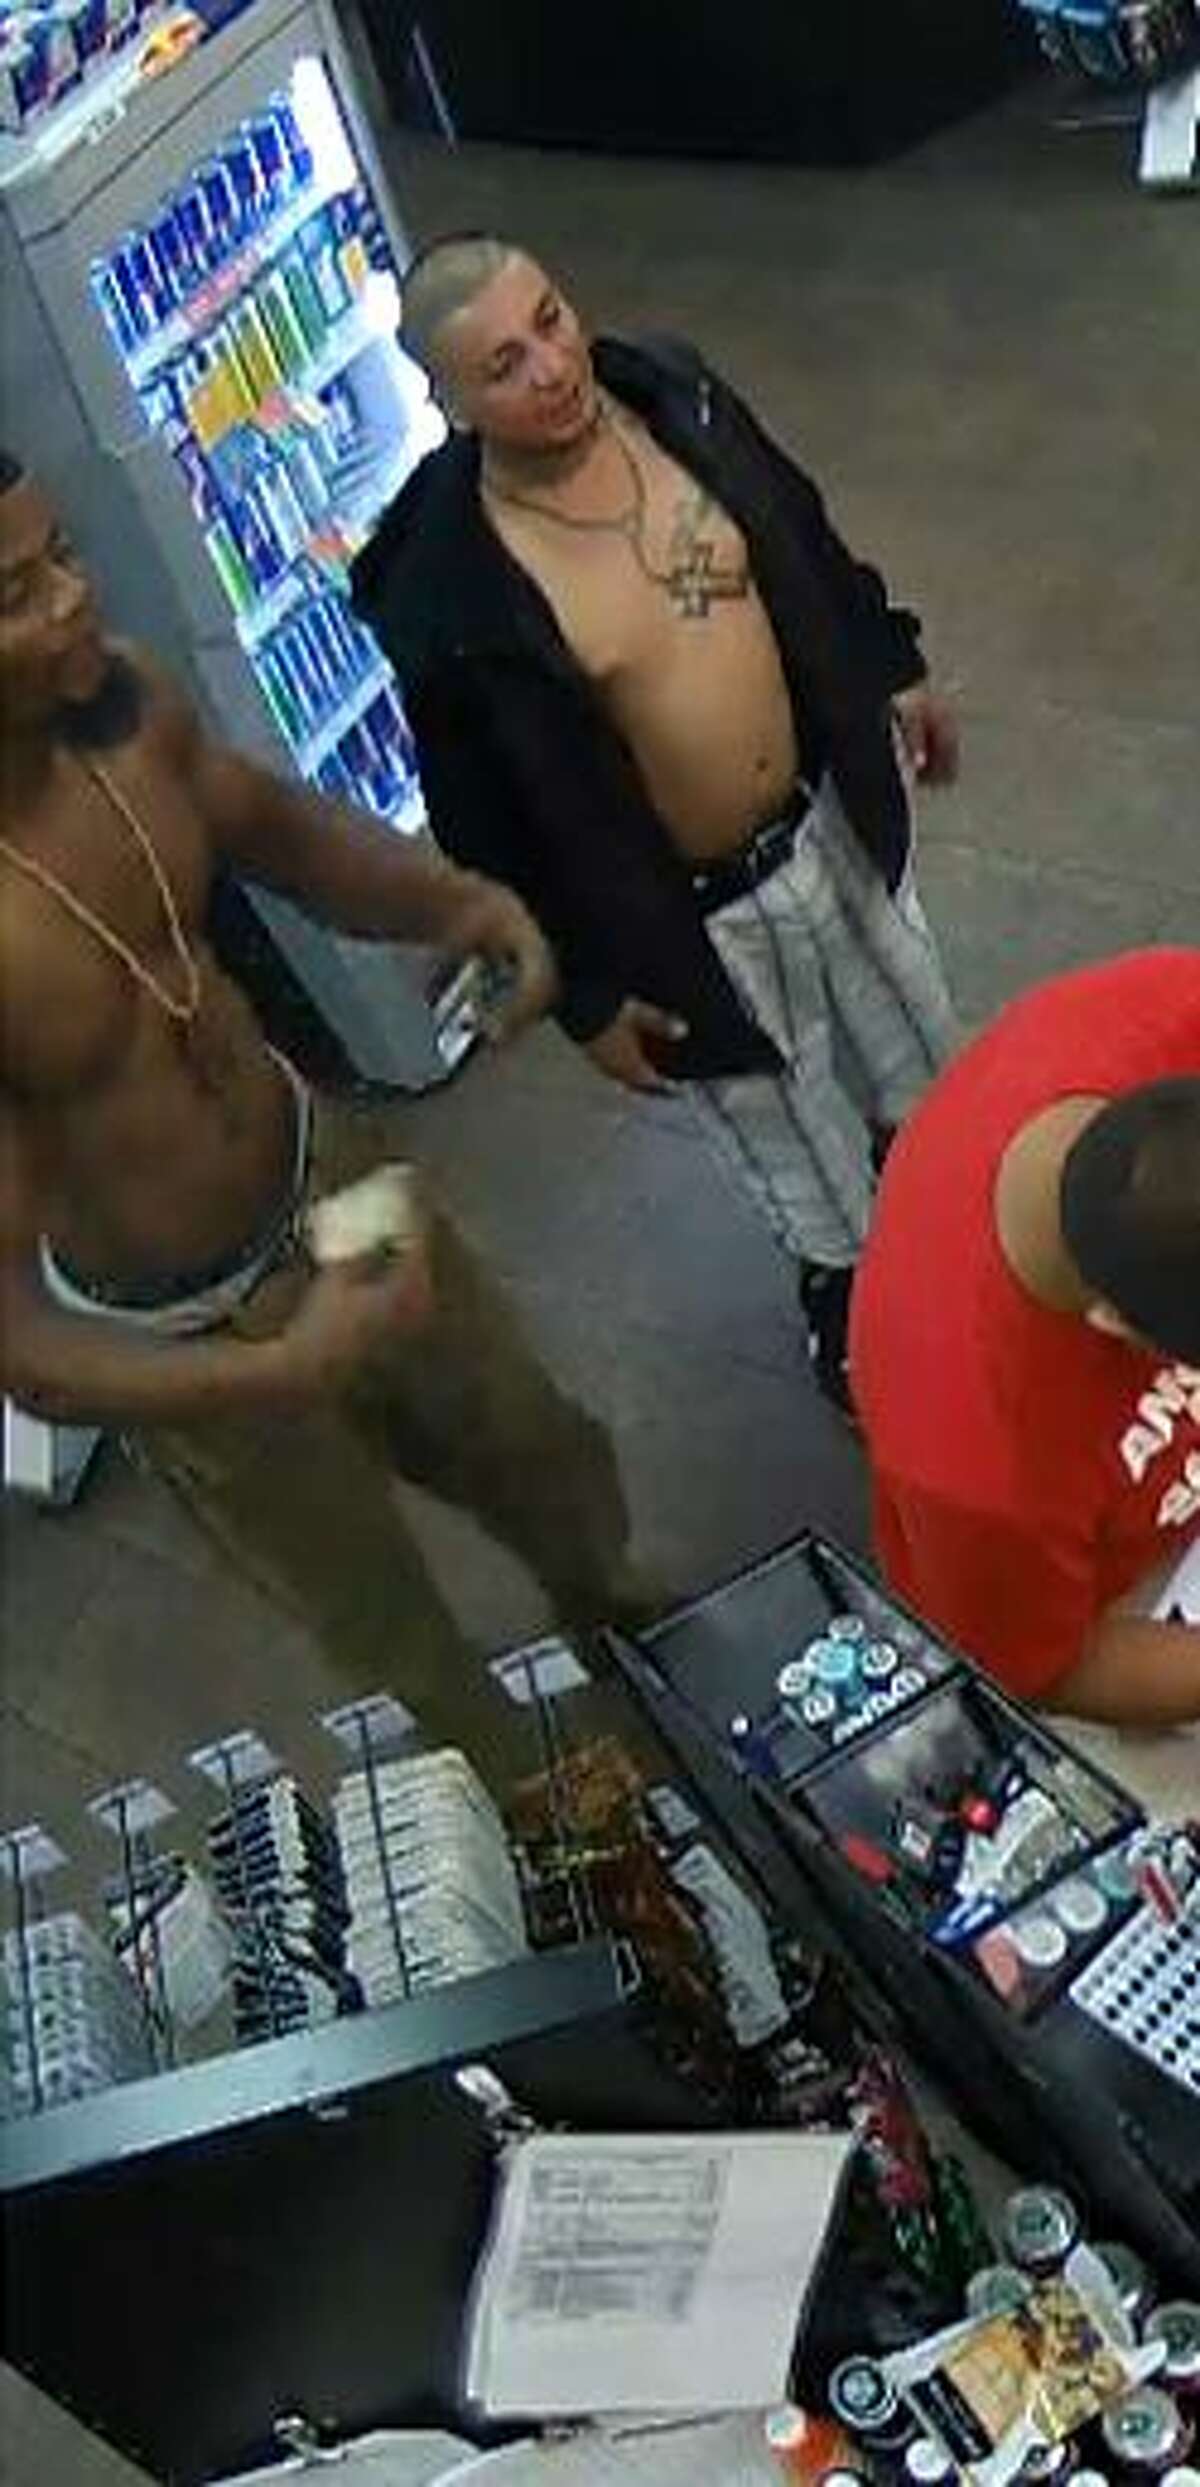 The shirtless duo entered the Murphy's in the 2500 block of Southeast Military Drive on Sept. 19, and one of the men grabbed the beer.